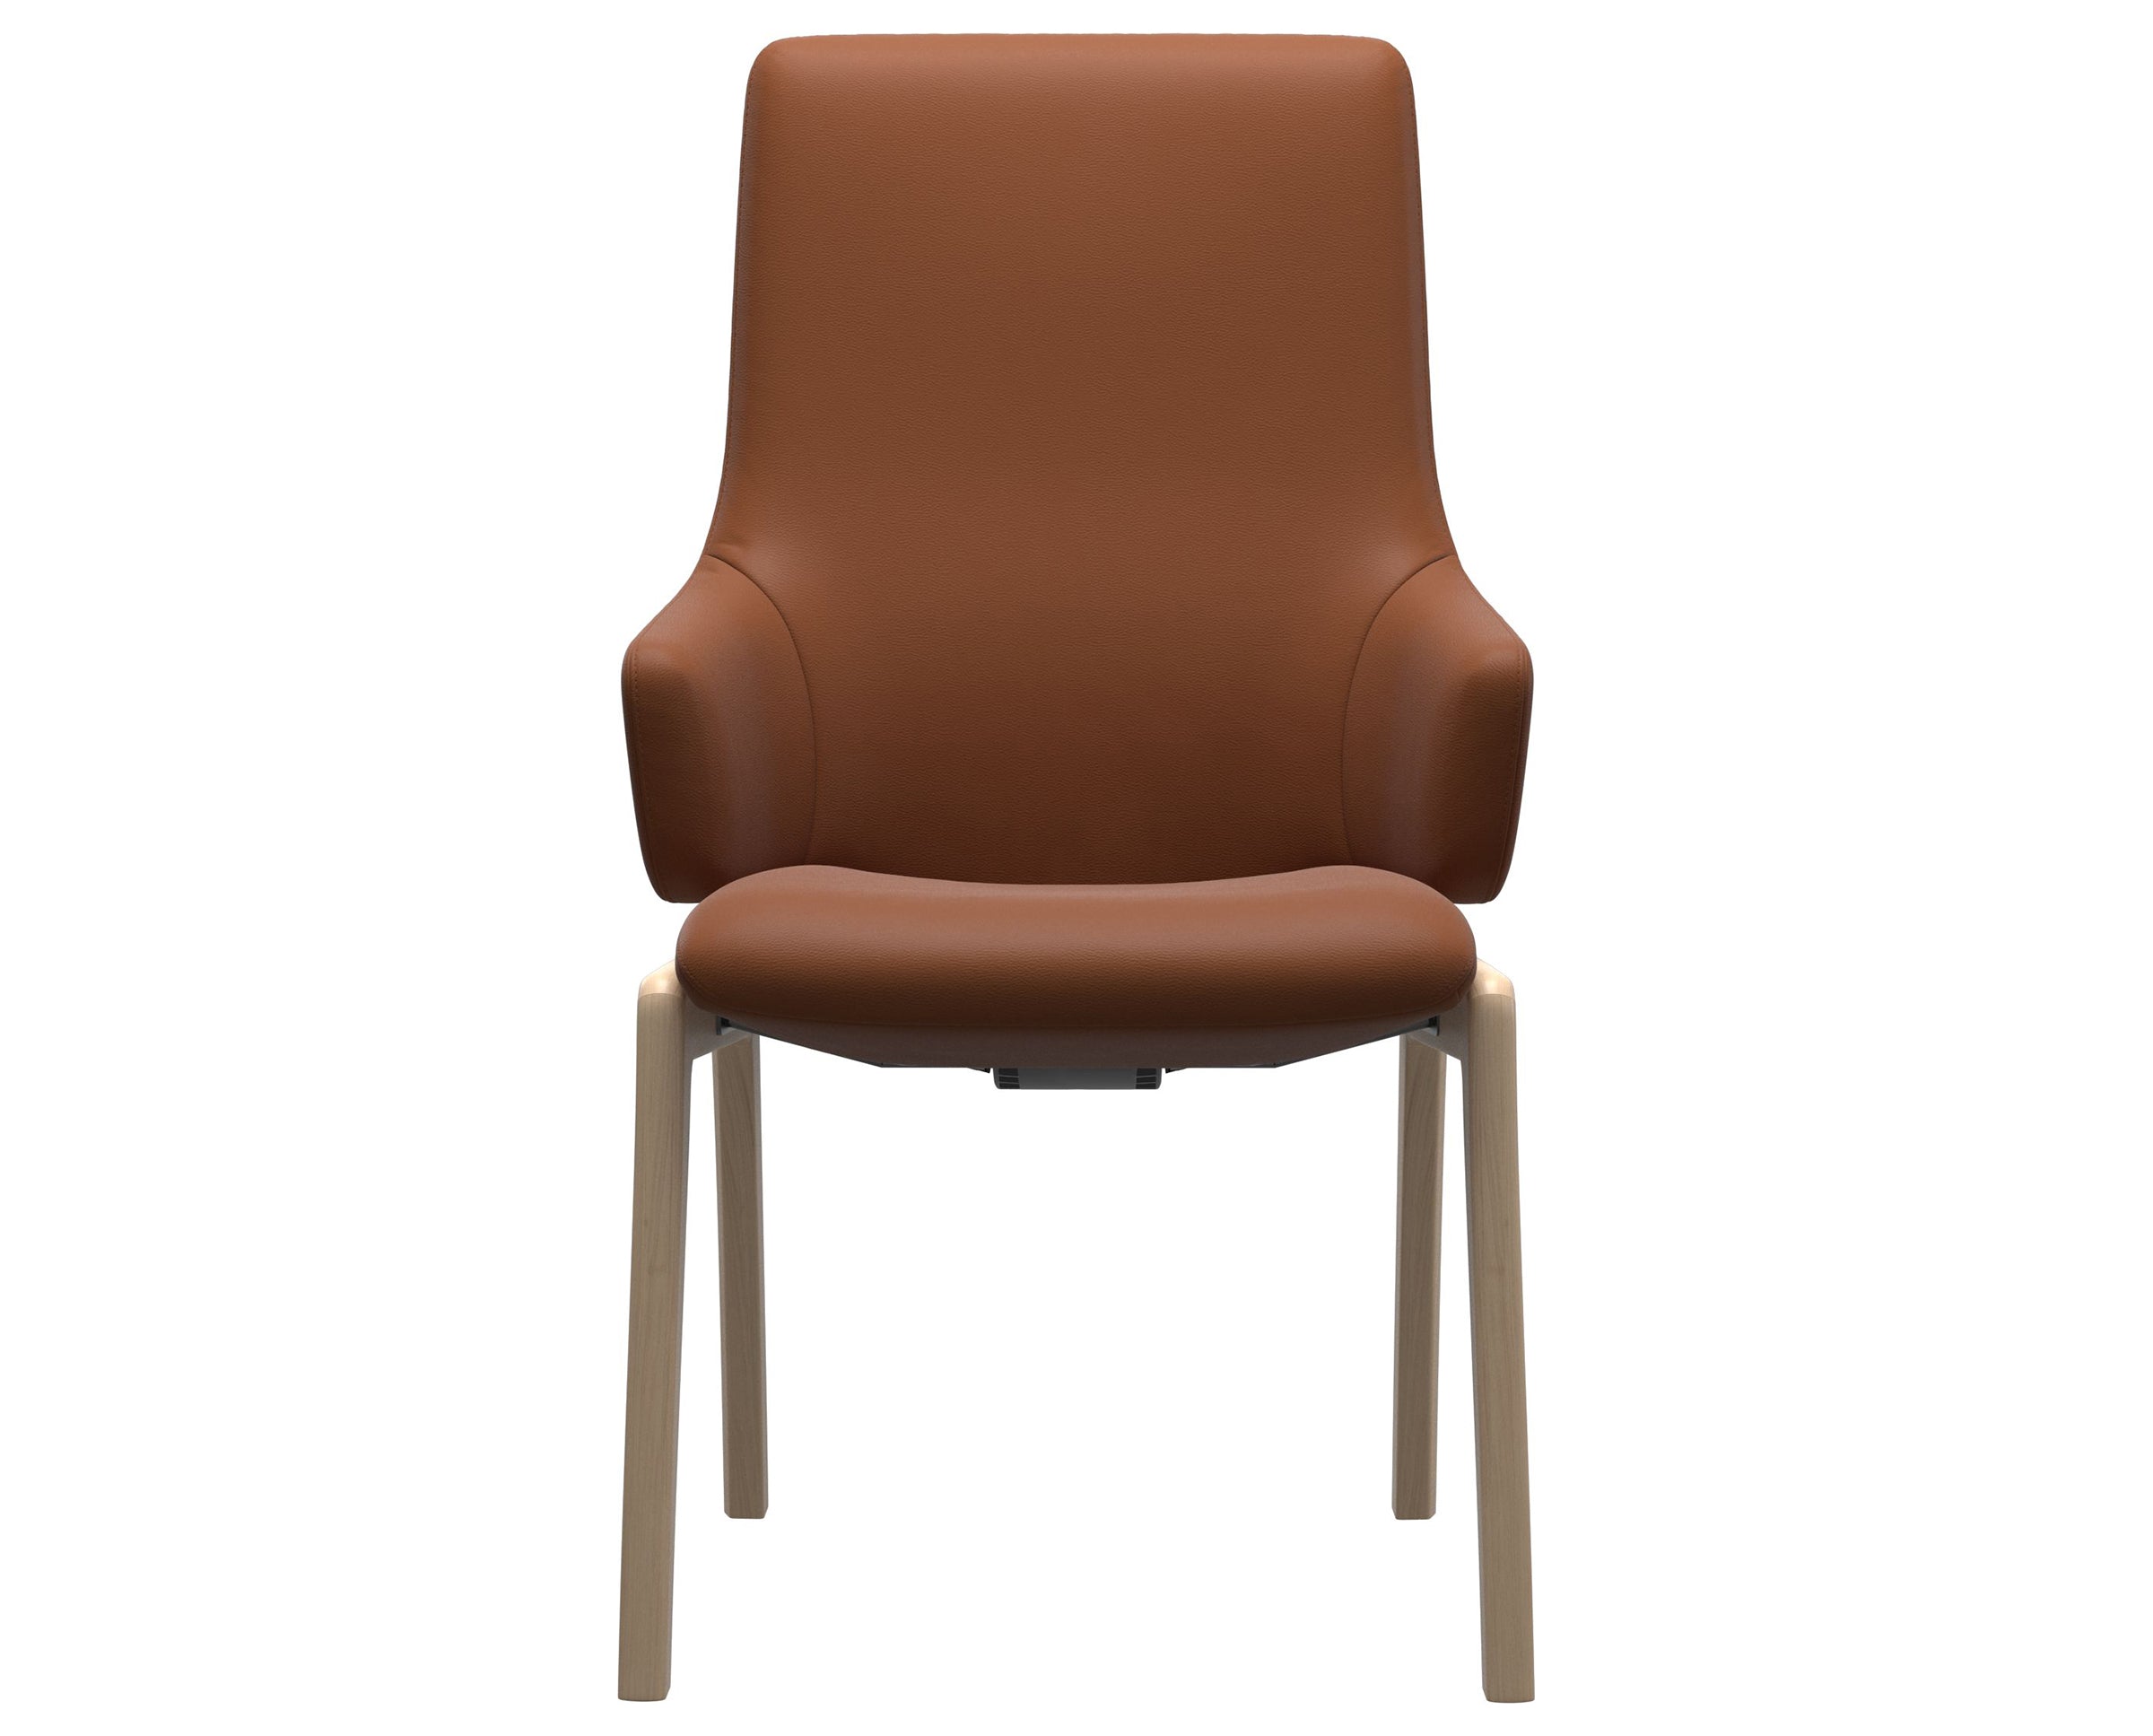 Paloma Leather New Cognac and Natural Base | Stressless Laurel High Back D100 Dining Chair w/Arms | Valley Ridge Furniture